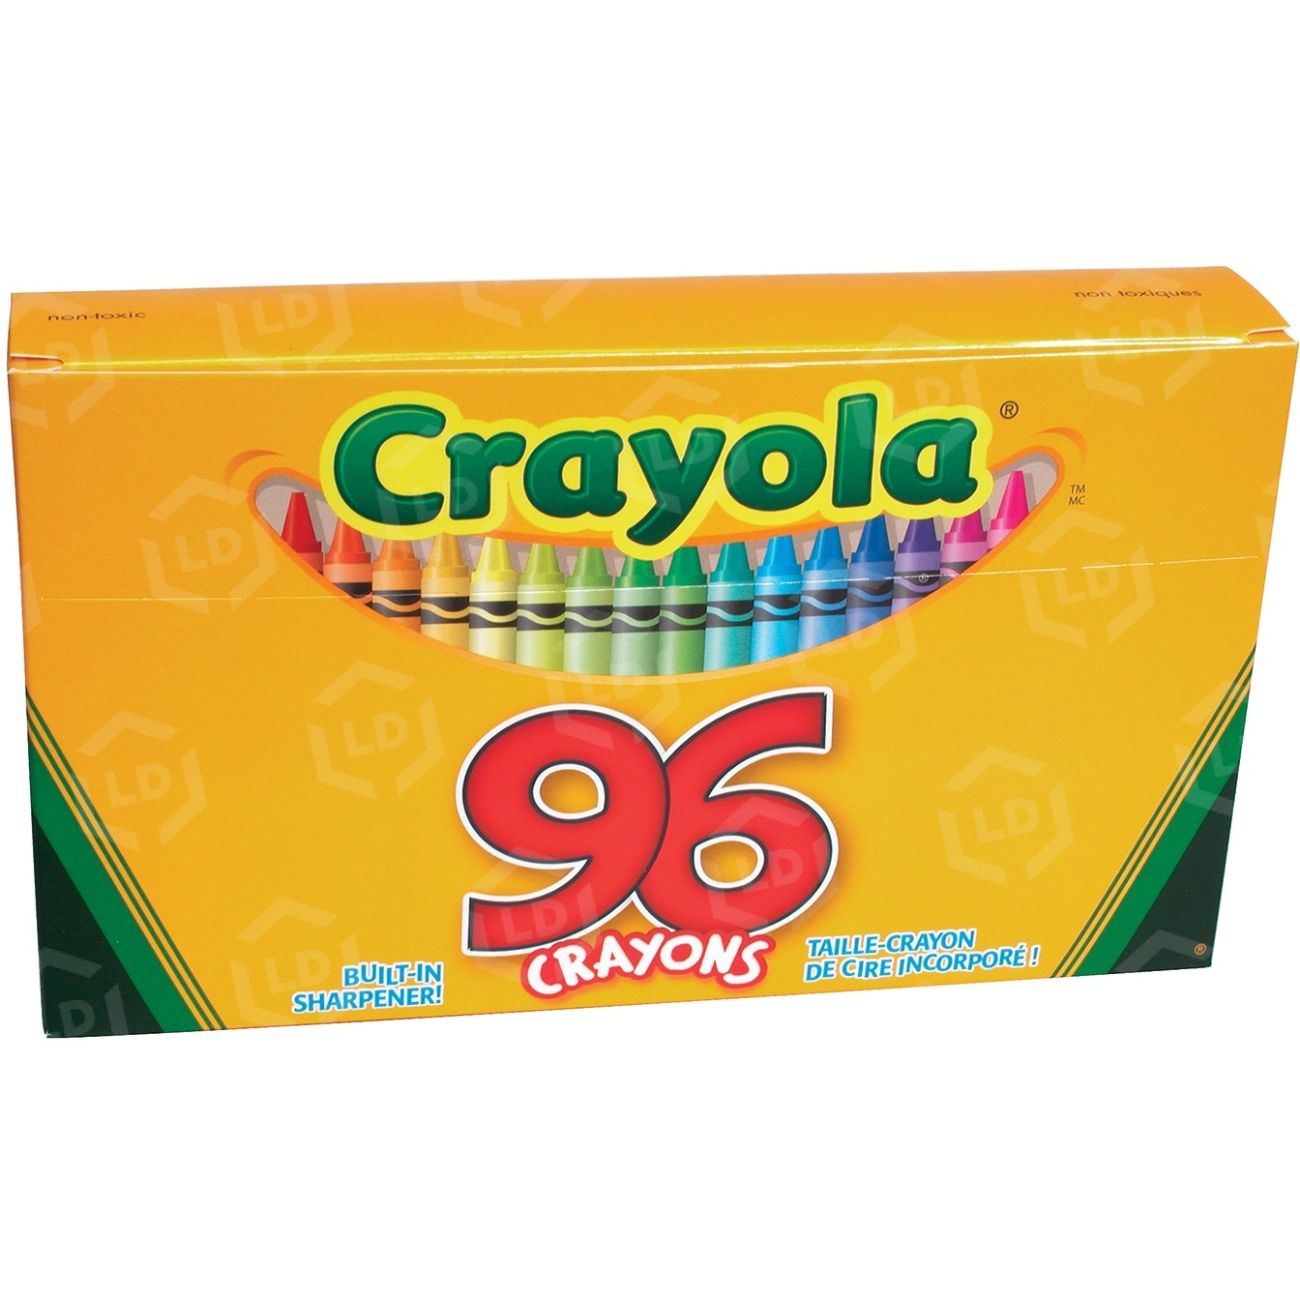 Me And A Box of 96 Crayolas